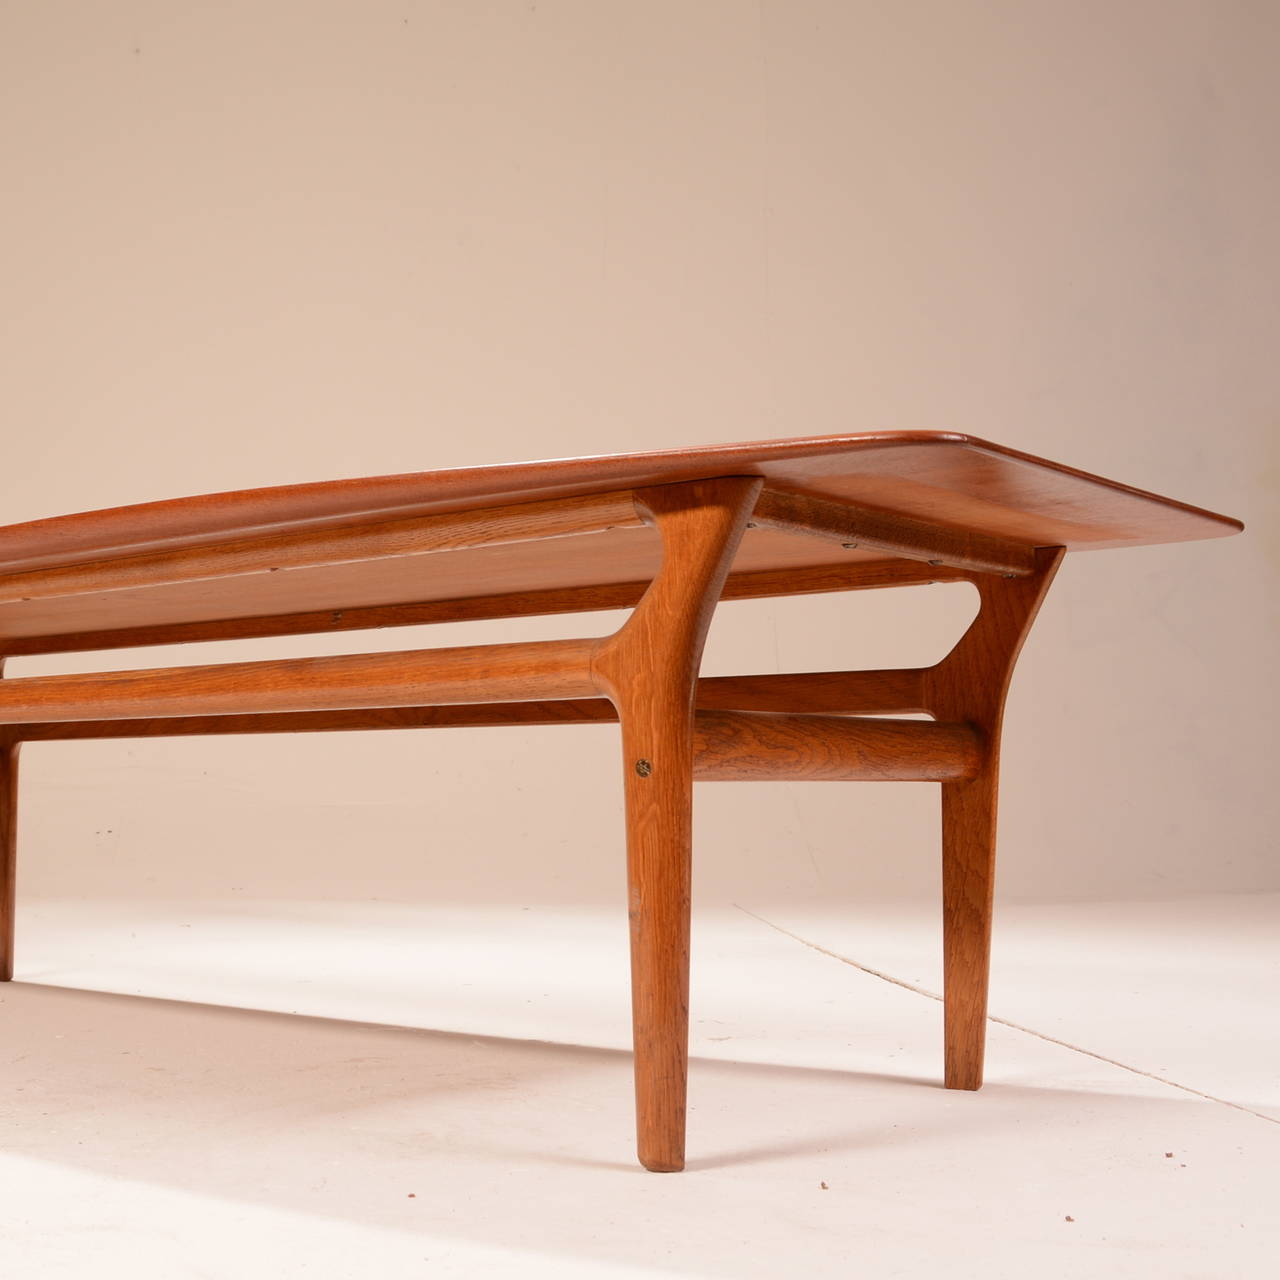 This is a solid teak and oak coffee table attributed to Kurt Østervig for Jason Møbelfabrik of Denmark and imported by Gunnar Schwartz Co. of Los Angeles. This large coffee table is in great vintage condition with no visible wear.